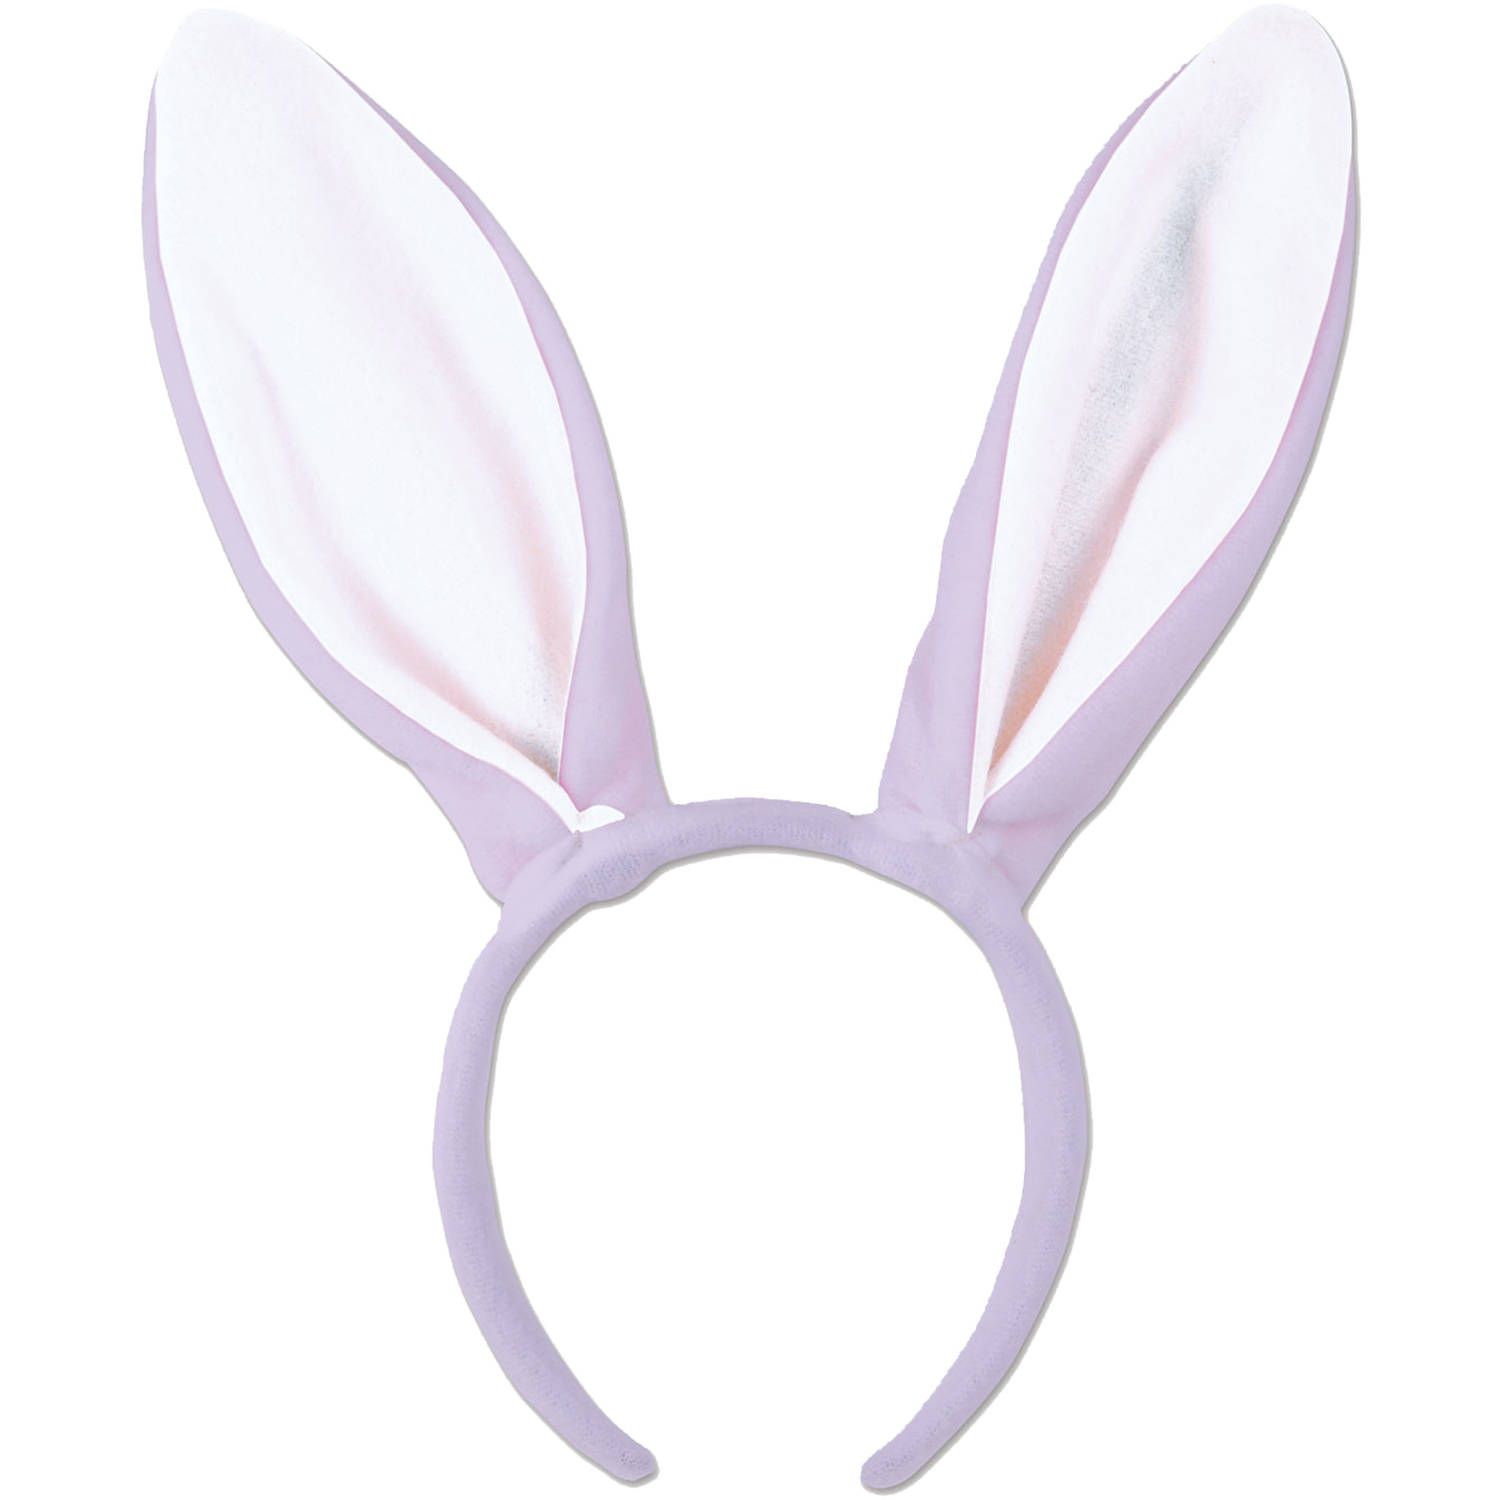 Lavender with White Lining Bunny Ears Adult Halloween Accessory | Walmart (US)